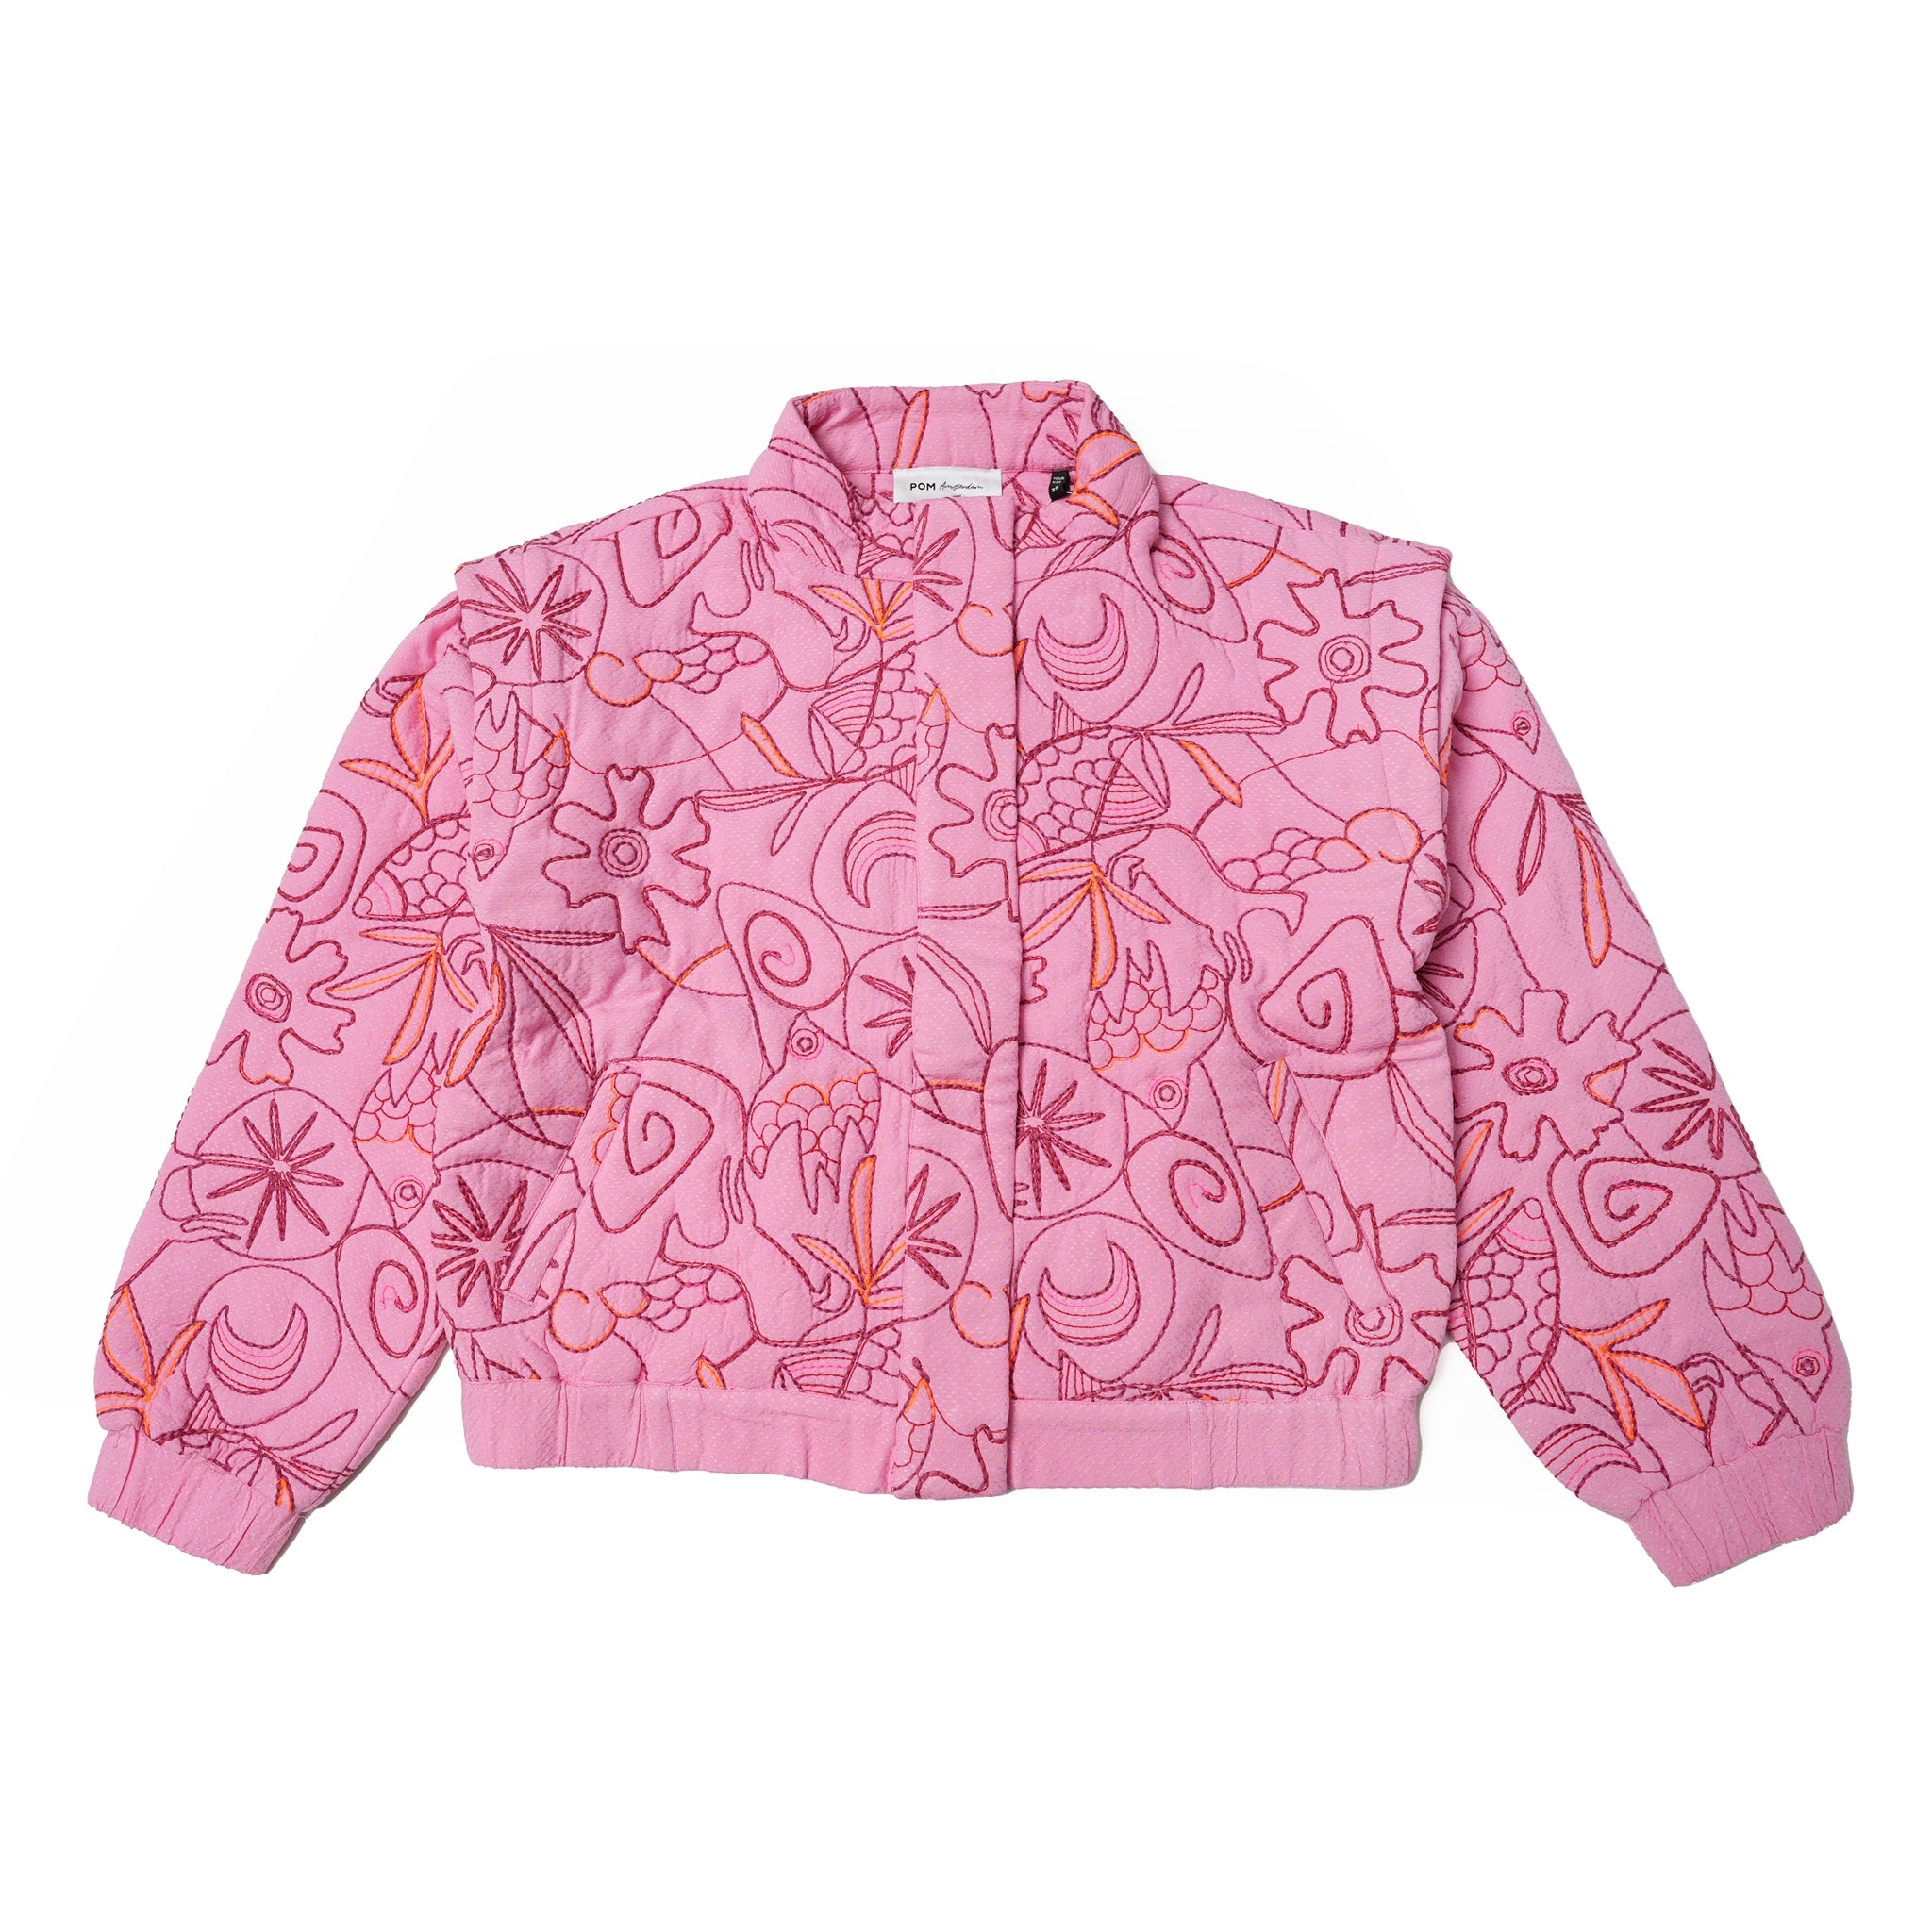 No:SP7383 | Name:JACKET | Color:Dreams French Pink【POM AMSTERDAM_ポムアムステルダム】